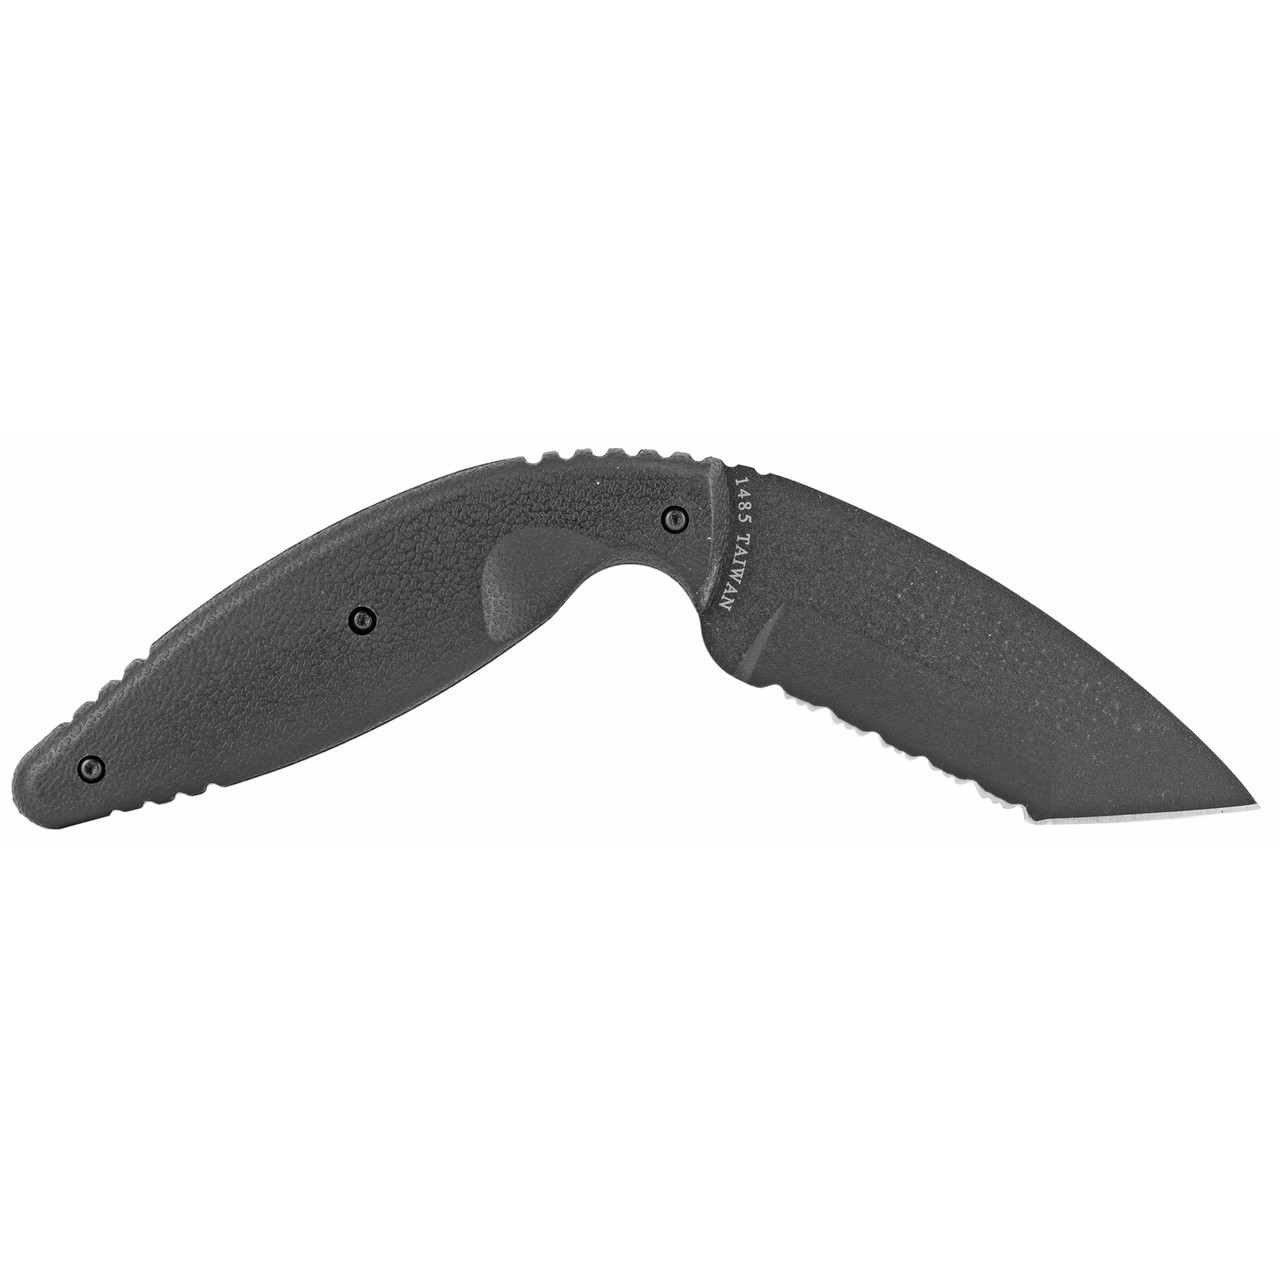 KABAR, TDI Law Enforcement, Fixed Blade Knife, 3.688" Blade Length, 7.75" Overall Length, Tanto Point, Combonation Serrated Edge,